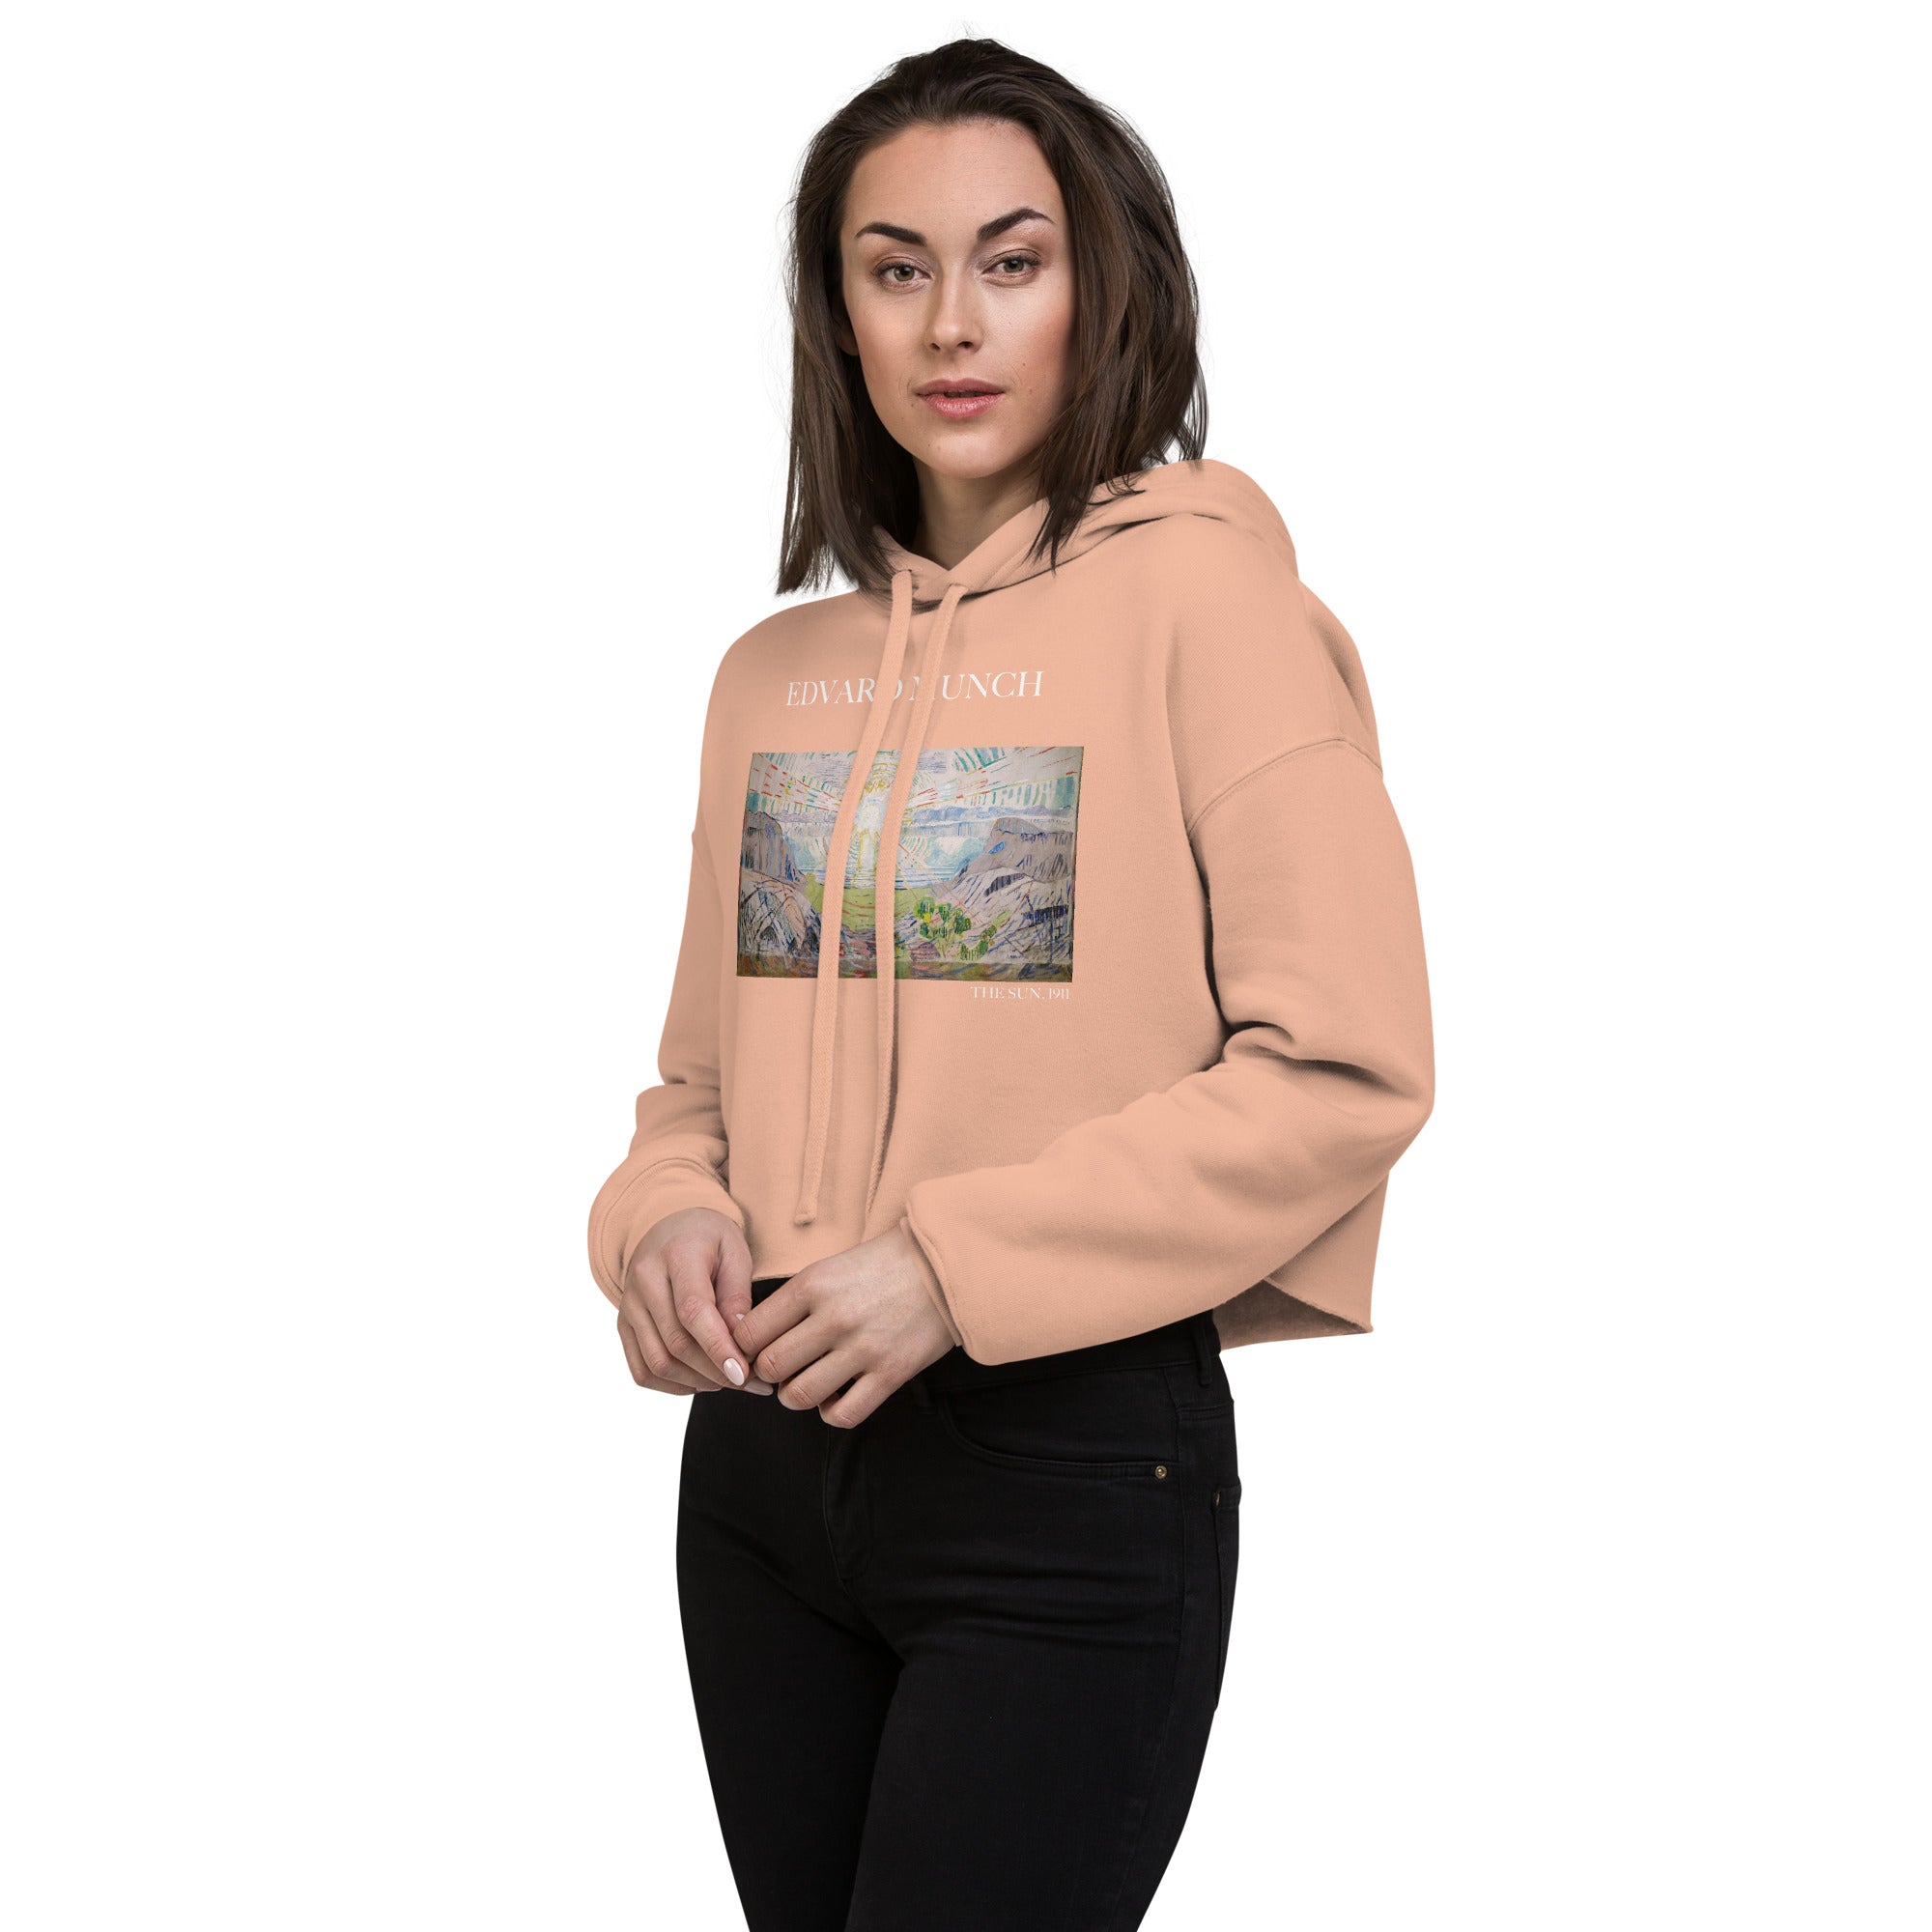 Edvard Munch 'The Sun' Famous Painting Cropped Hoodie | Premium Art Cropped Hoodie